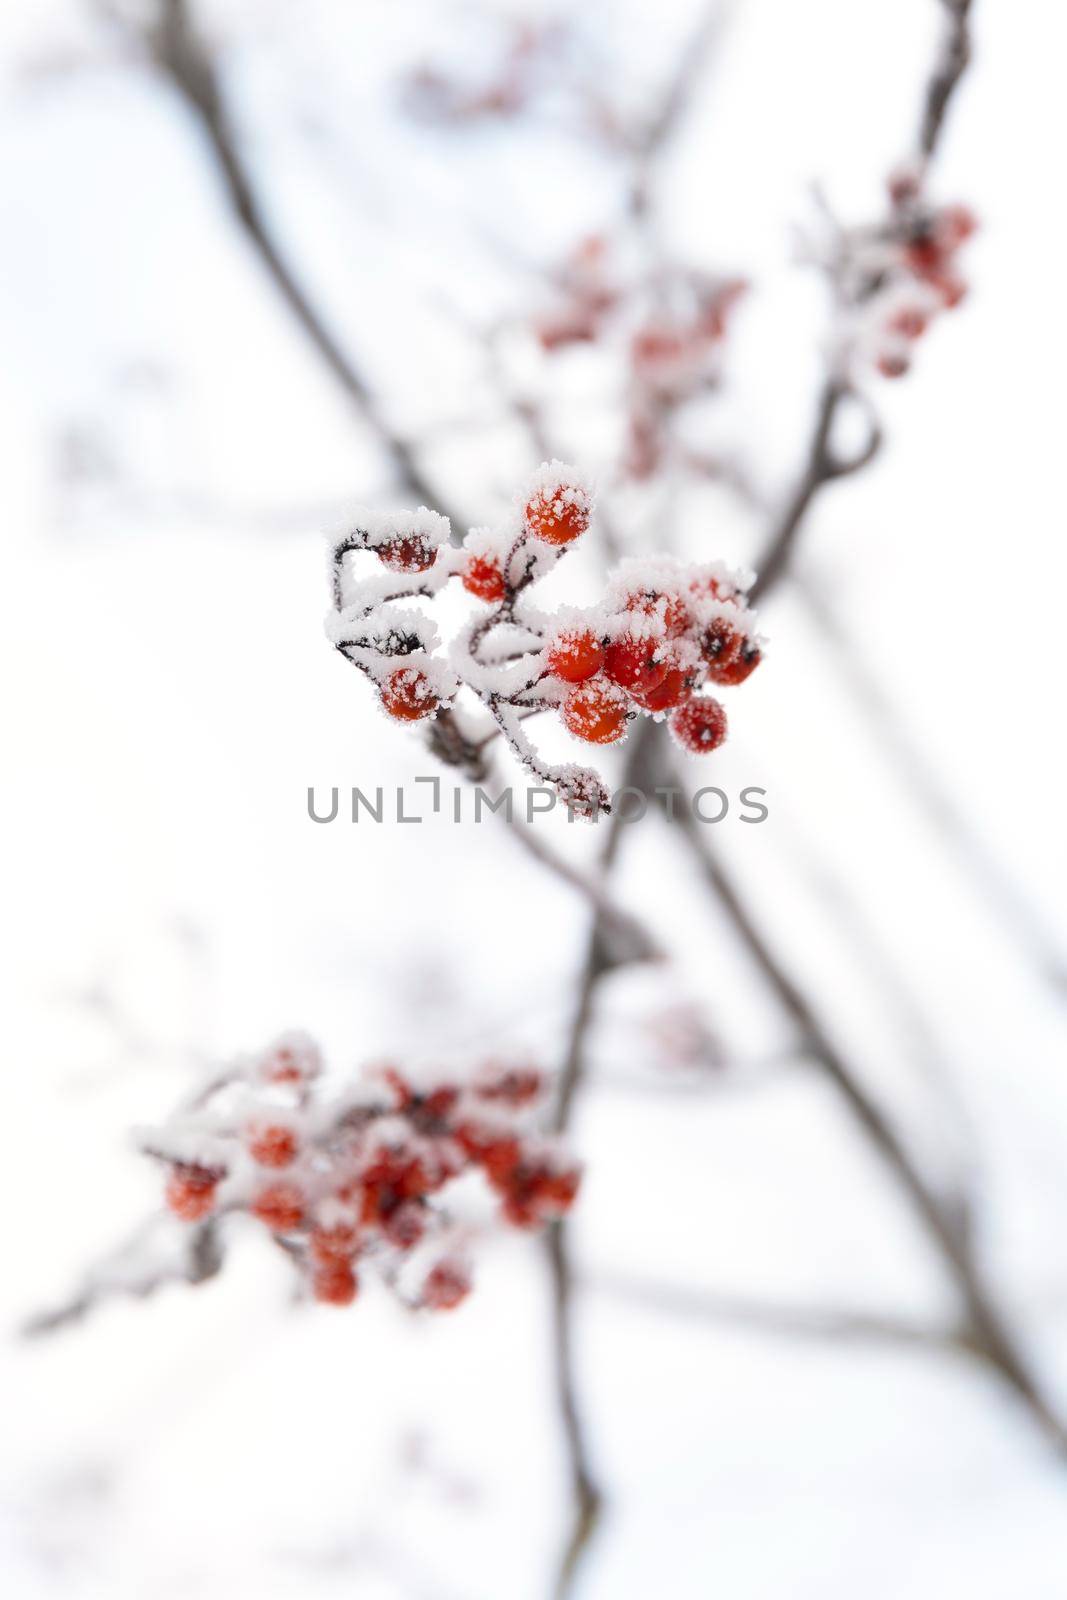 rowan branches close-up with orange and red fruits covered with hoarfrost and snow photo with depth of field.